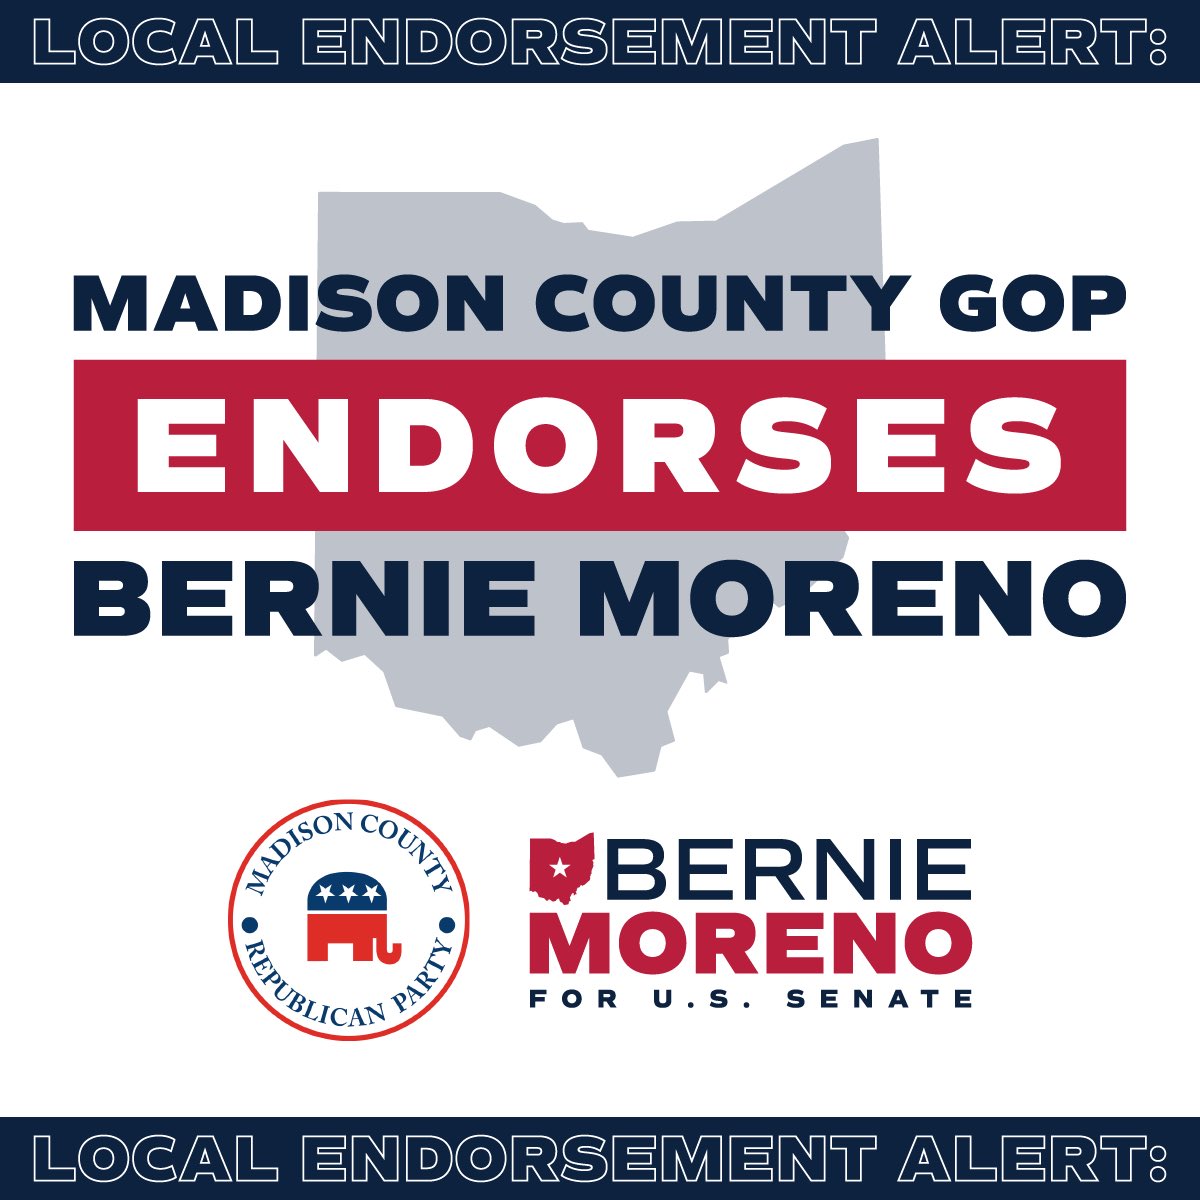 Humbled and honored to have received the endorsement from the Madison County Republican Party. The message is clear: no more career politicians in DC. We change DC by changing who we send there.